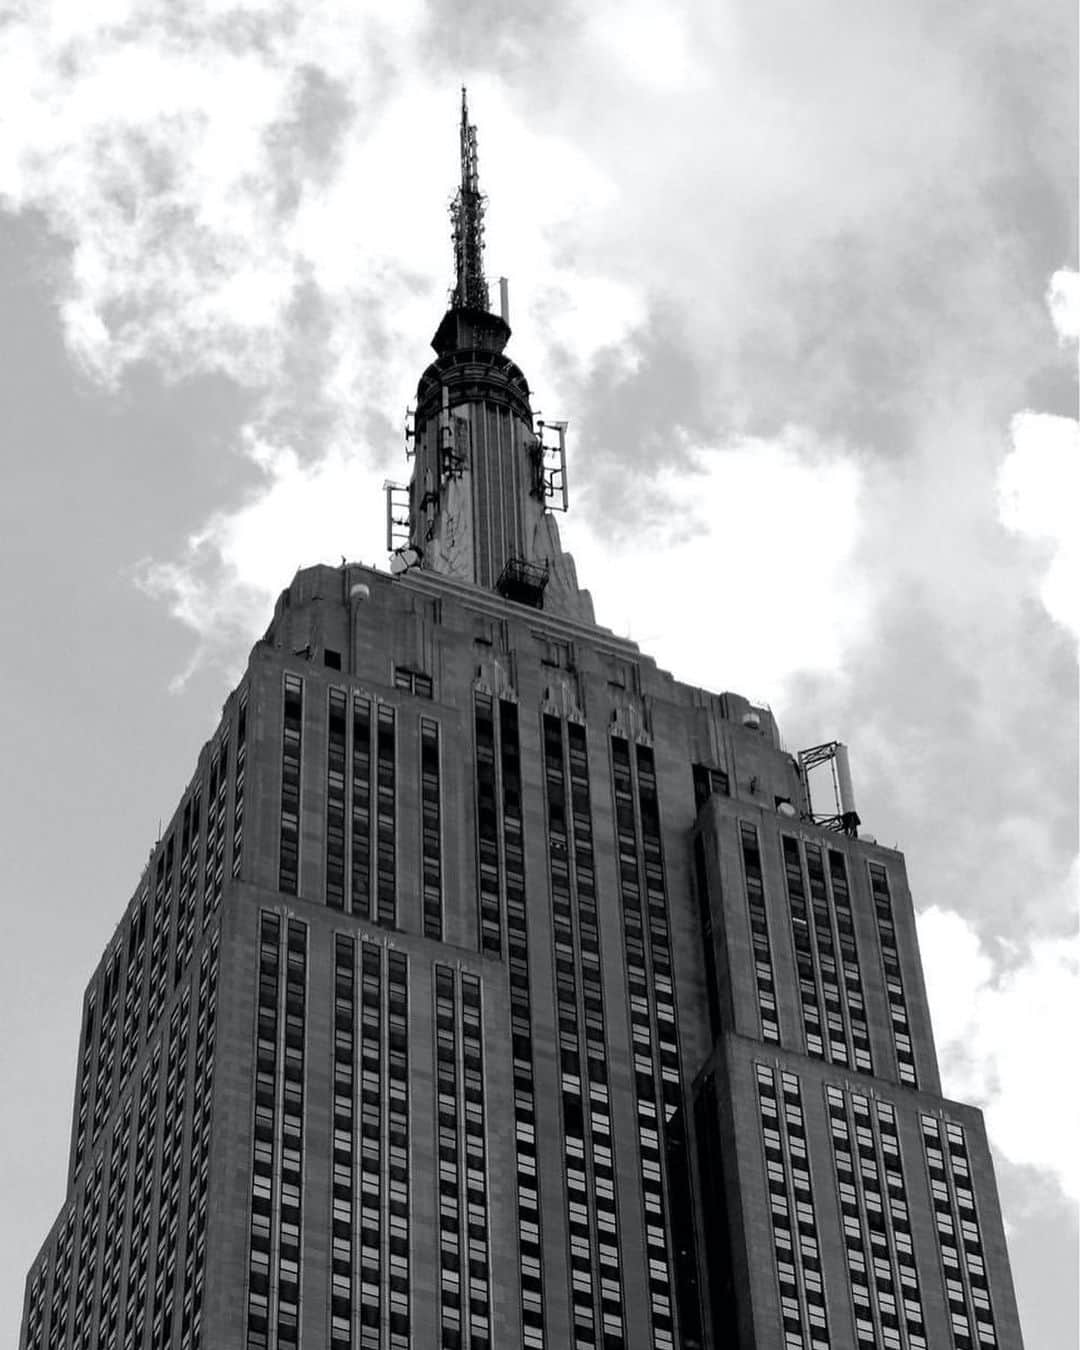 Empire State Buildingさんのインスタグラム写真 - (Empire State BuildingInstagram)「#GIVEAWAY – Have you ever drawn, painted or sculpted the #EmpireStateBuilding? This is your chance to win a $250 Amazon gift card PLUS a signed print of the drawing featured in this post (swipe right to see!) by @gregdinapoliart! ⠀⠀⠀⠀⠀⠀⠀⠀⠀⠀⠀⠀⠀⠀⠀⠀⠀⠀ TO ENTER: ⬇️ ① Follow us & @gregdinapoliart! ⭐️ ② Post your drawing, painting or sculpture to Instagram with the hashtag #ESBArtContest & tag @empirestatebldg ✍️ ⠀⠀⠀⠀⠀⠀⠀⠀⠀ *Public profiles only!* You can enter something you’ve created previously or create something new. Tap bio link for full rules. Contest ends July 2nd! ⠀⠀⠀⠀⠀⠀⠀⠀⠀⠀⠀⠀⠀⠀⠀⠀⠀⠀⠀⠀⠀⠀⠀⠀⠀⠀⠀⠀⠀⠀⠀⠀⠀⠀⠀⠀⠀⠀⠀⠀⠀⠀⠀⠀⠀⠀⠀⠀⠀⠀⠀⠀⠀⠀⠀⠀⠀⠀⠀⠀⠀⠀⠀⠀⠀⠀⠀⠀⠀⠀⠀⠀⠀⠀⠀⠀⠀⠀⠀⠀⠀⠀⠀⠀⠀⠀⠀⠀⠀⠀⠀⠀⠀⠀⠀⠀⠀⠀⠀⠀⠀⠀⠀⠀⠀⠀⠀⠀⠀⠀⠀⠀⠀⠀⠀⠀⠀⠀⠀⠀⠀⠀⠀⠀⠀⠀⠀⠀⠀⠀⠀⠀⠀⠀⠀⠀⠀⠀⠀⠀⠀⠀⠀⠀⠀⠀⠀⠀⠀⠀⠀⠀⠀⠀⠀⠀⠀⠀⠀⠀⠀⠀⠀⠀⠀⠀⠀⠀⠀⠀⠀⠀⠀⠀⠀⠀⠀⠀⠀⠀⠀⠀⠀⠀⠀⠀⠀⠀⠀⠀⠀⠀⠀⠀⠀⠀⠀⠀⠀⠀⠀⠀⠀⠀⠀⠀⠀⠀⠀⠀⠀⠀⠀⠀⠀⠀⠀⠀⠀⠀⠀⠀⠀⠀⠀⠀⠀⠀⠀⠀⠀⠀⠀⠀ This contest/giveaway is in no way sponsored, endorsed or administered, or associated with Instagram. This giveaway is sponsored by @empirestatebldg. The contest will run until 11:59PM EST 7/2/20. Entrants must follow @empirestatebldg & @gregdinapoliart. Giveaway is open only to residents 18+ years of age, of the 50 United States and District of Columbia. Tap bio link for official rules.」6月26日 1時02分 - empirestatebldg